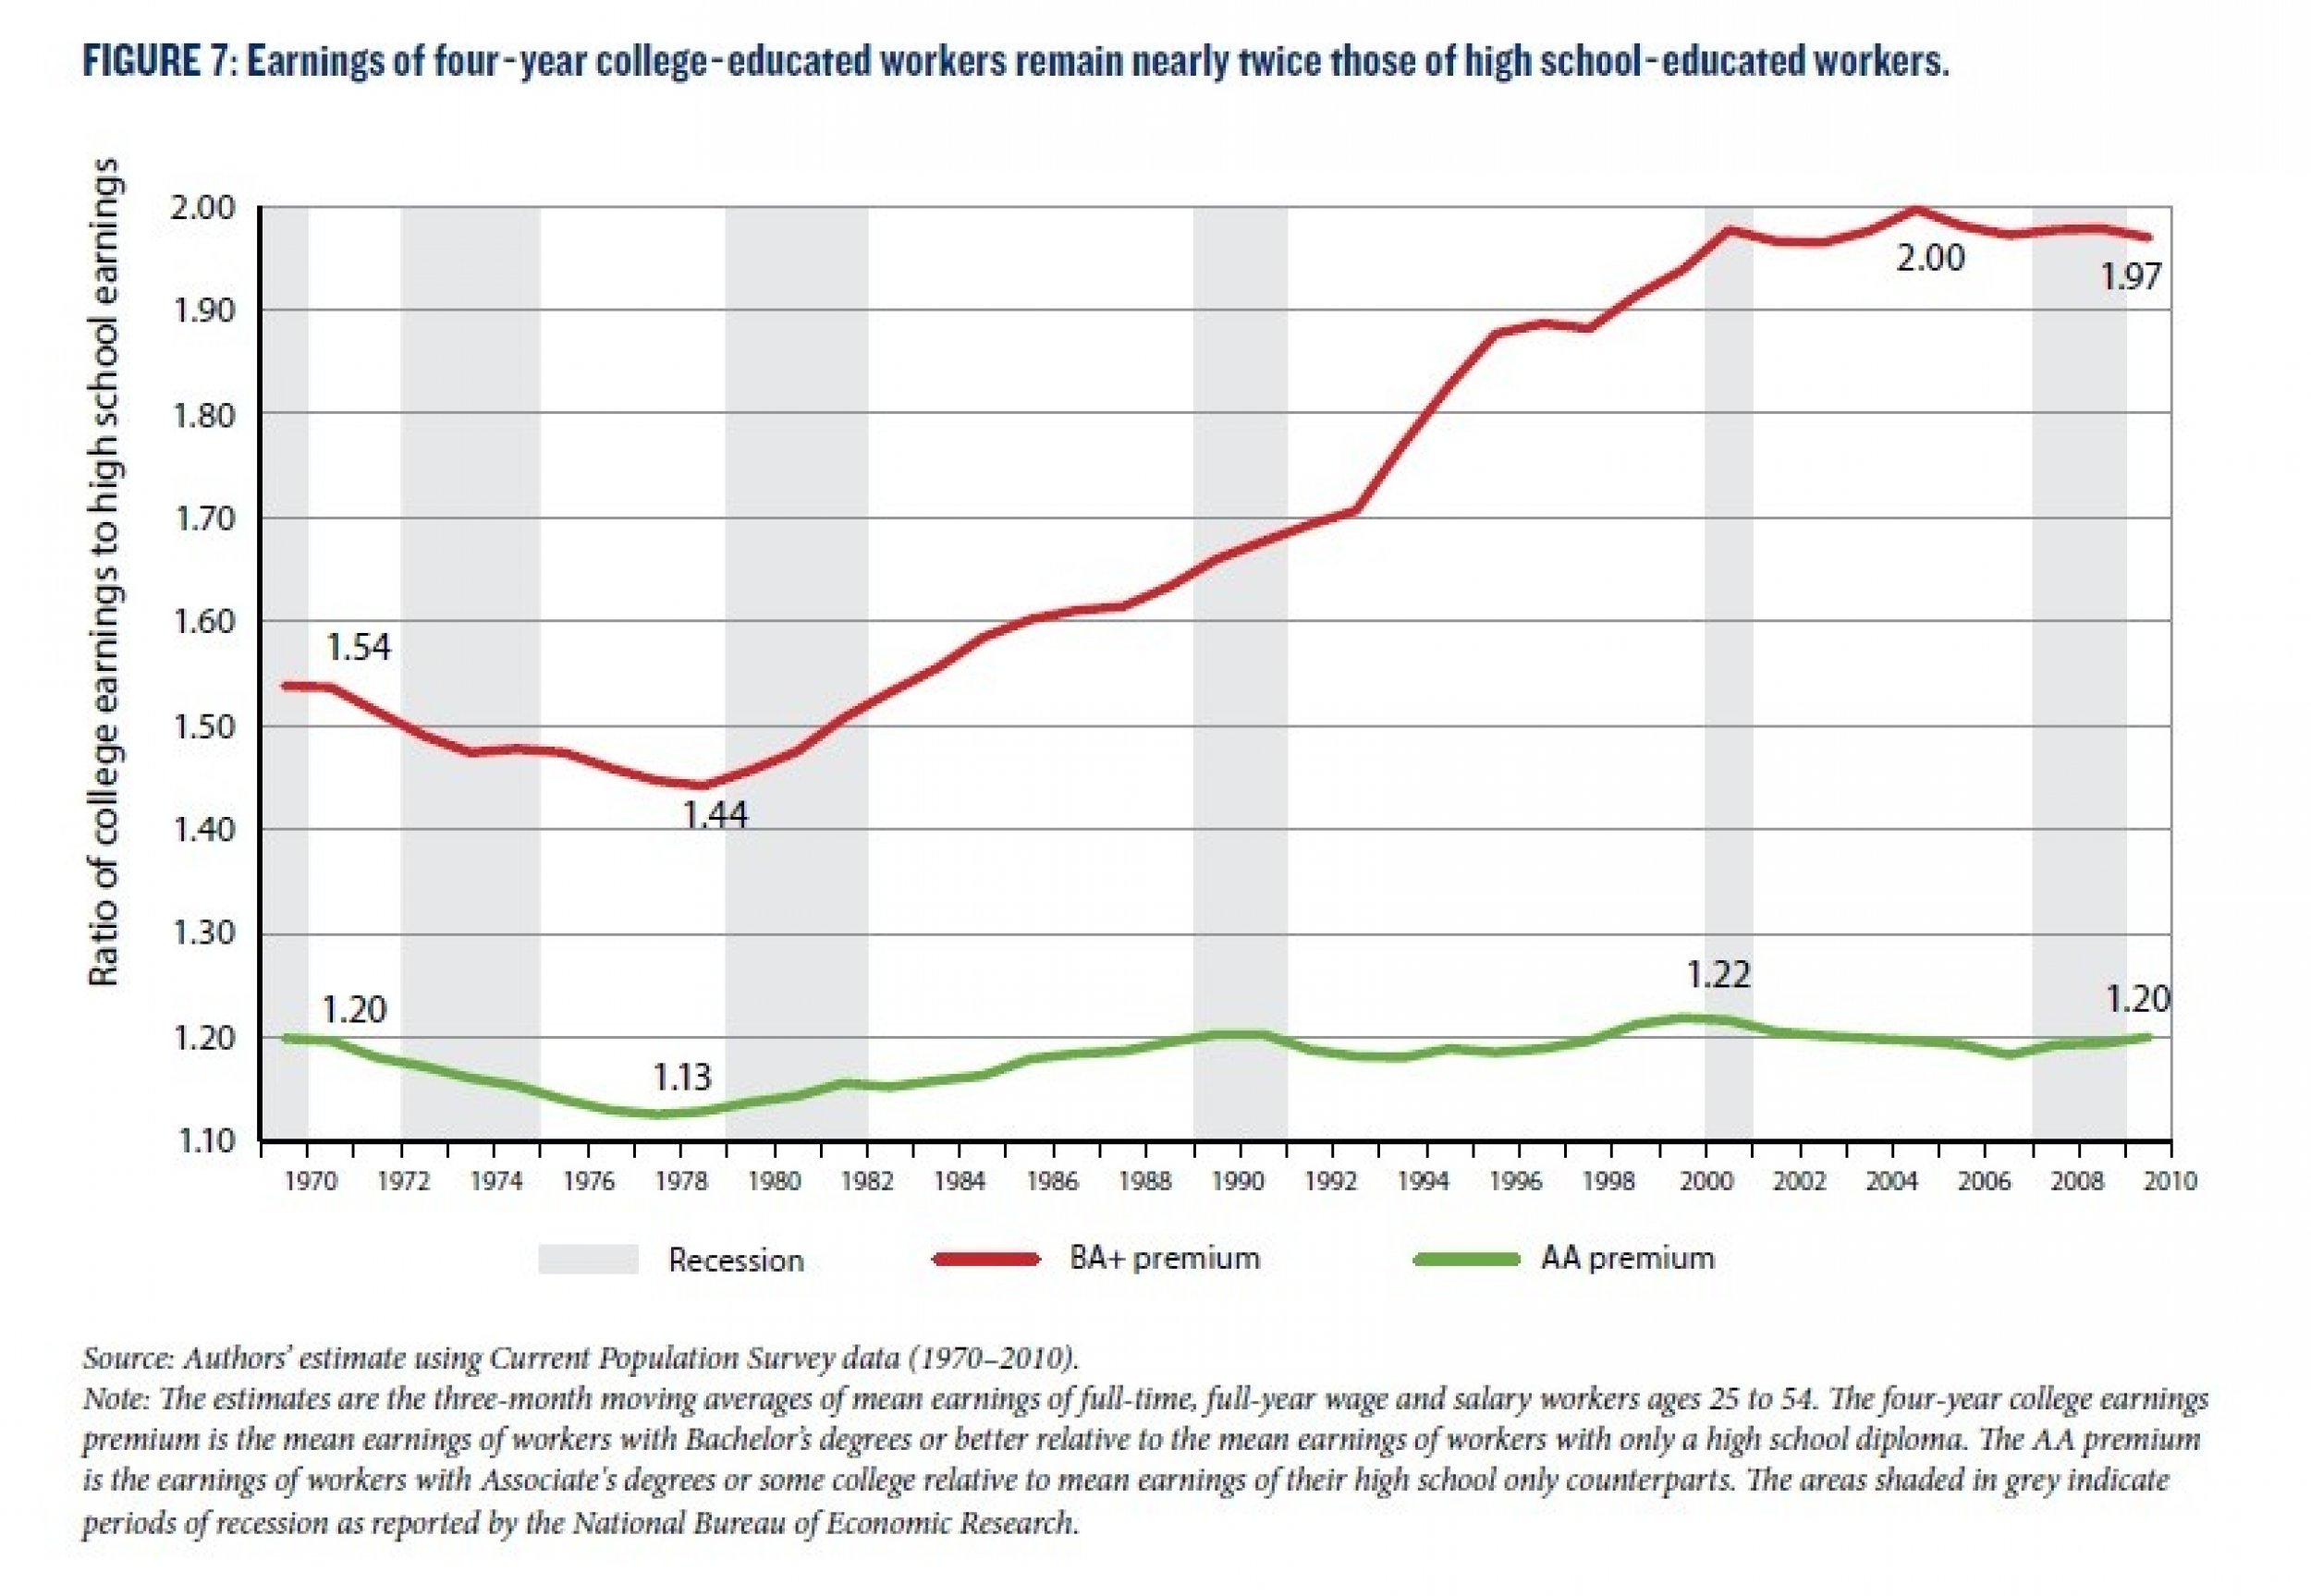 Earnings of four-year college-educated workers remain nearly twice those of high school-educated workers